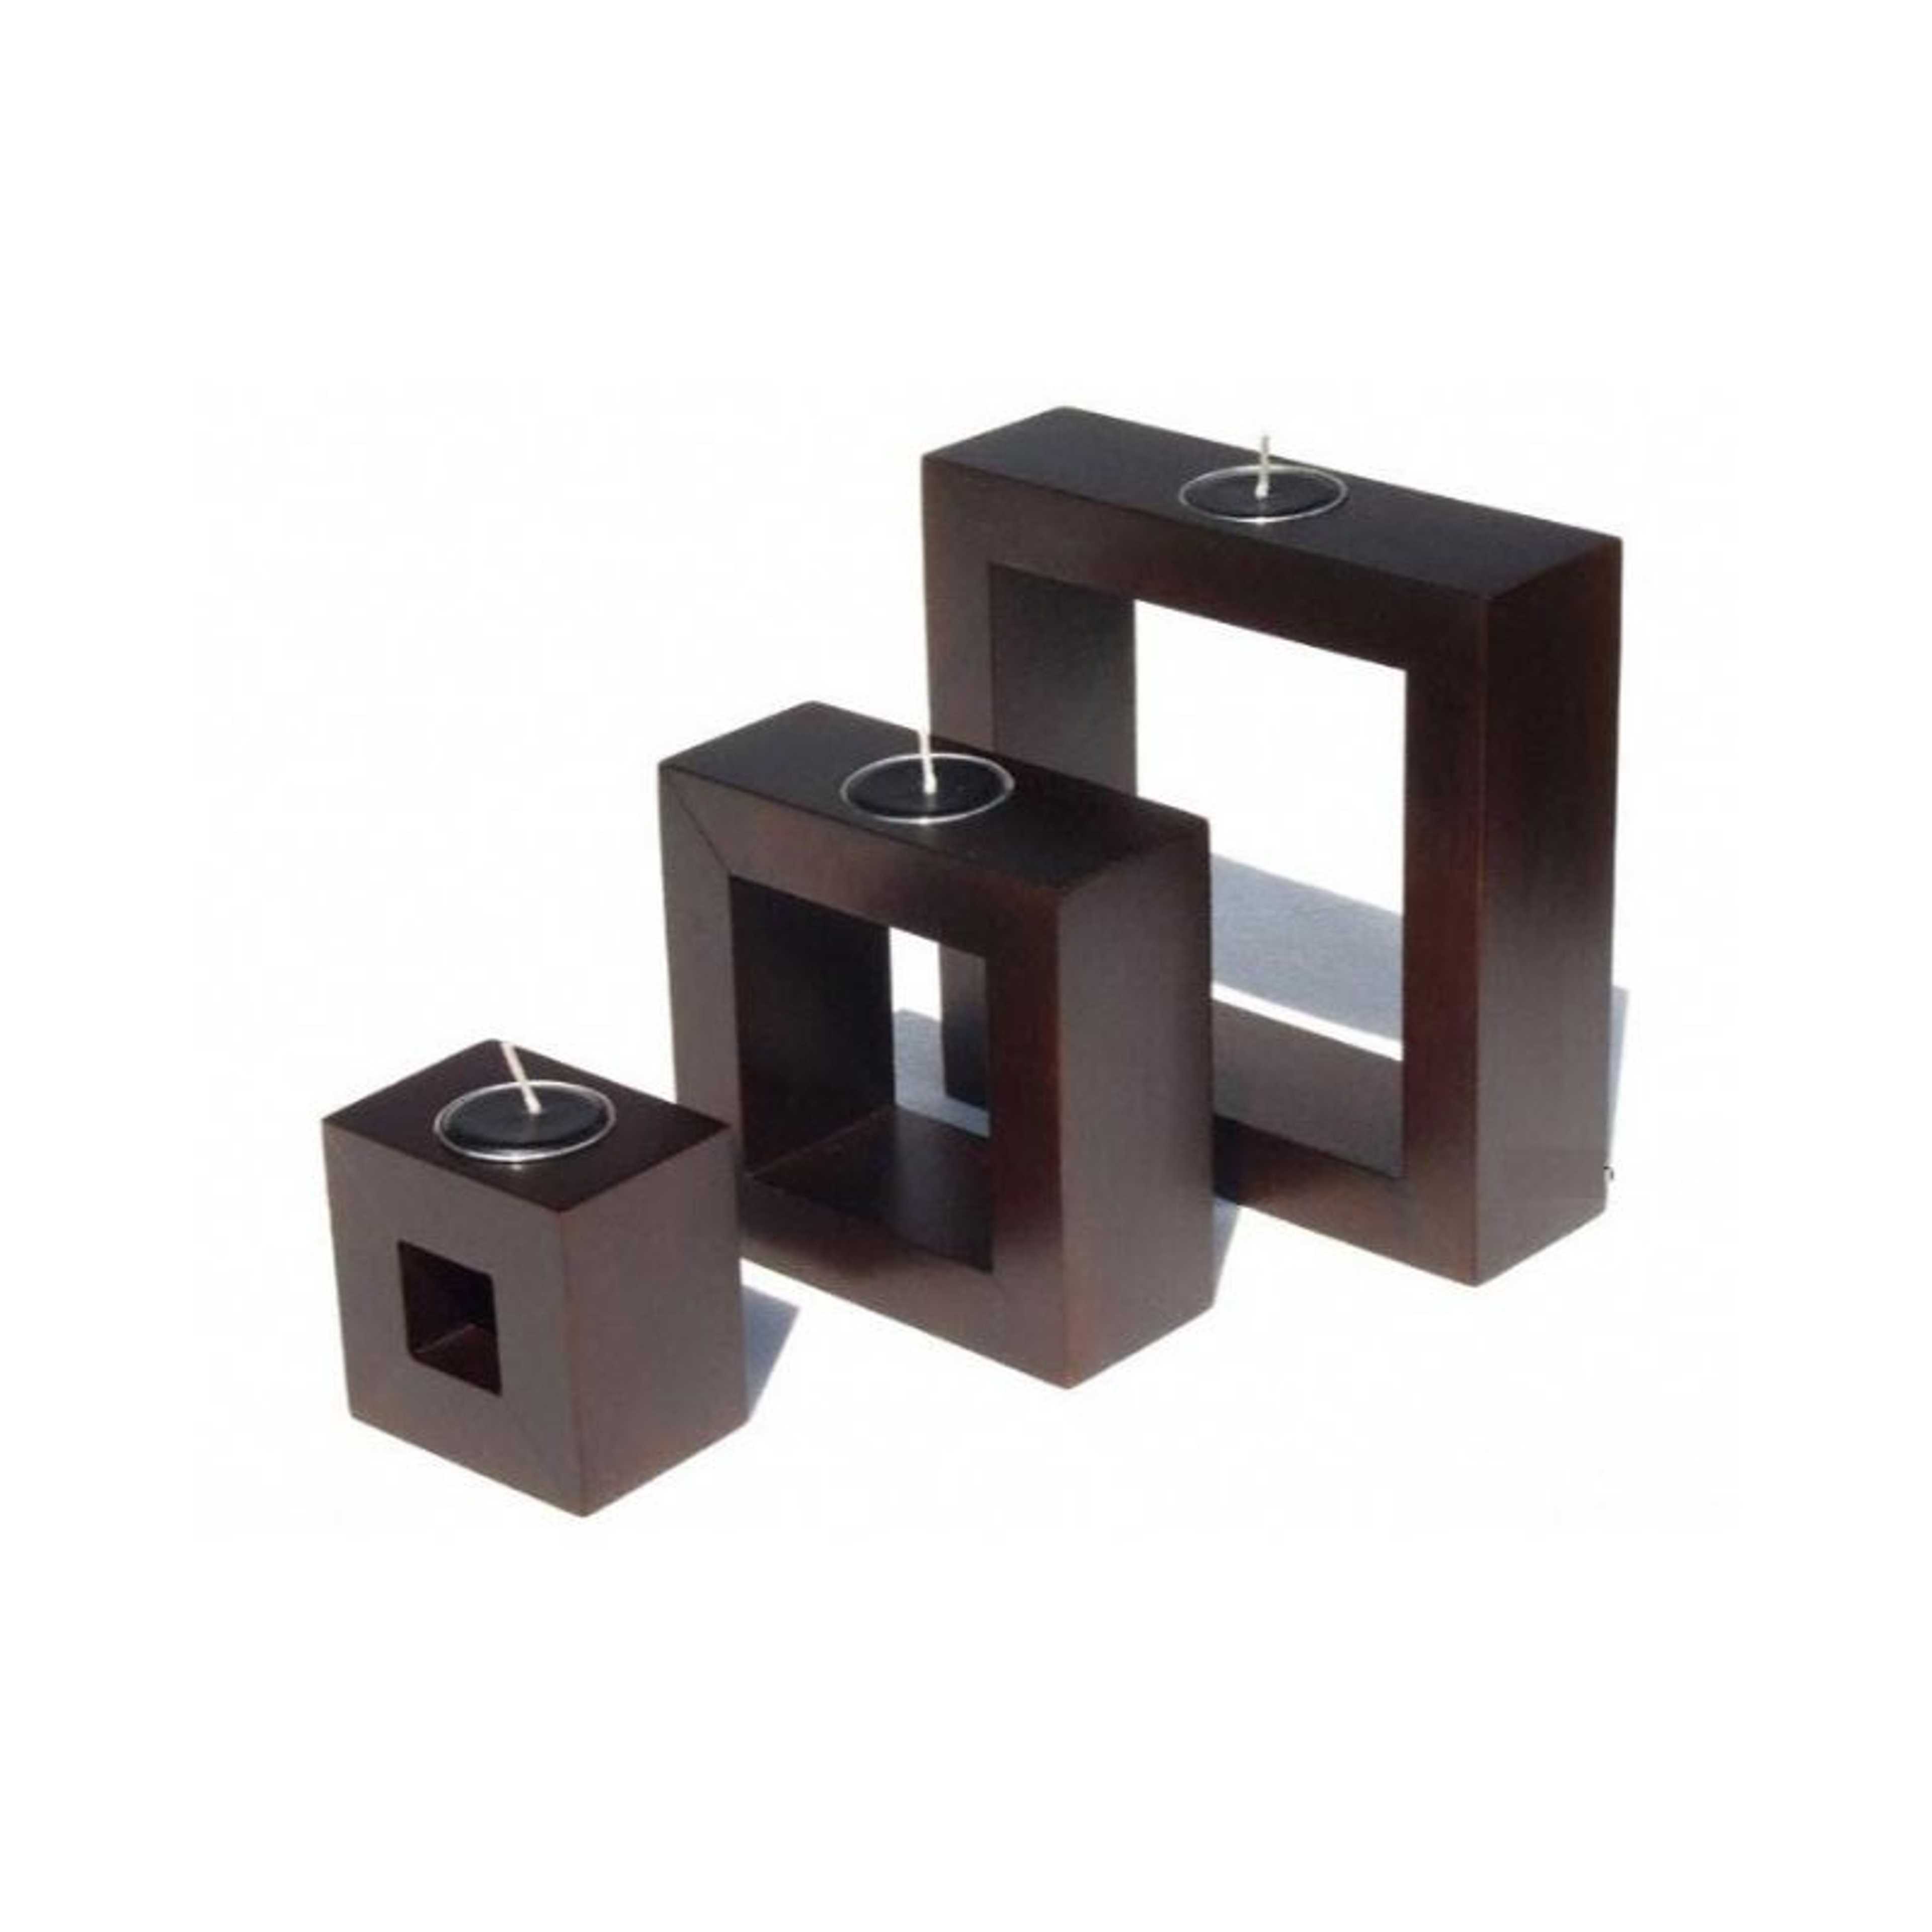 Set of 3 - Solid Mango Wood Square Candle Holders